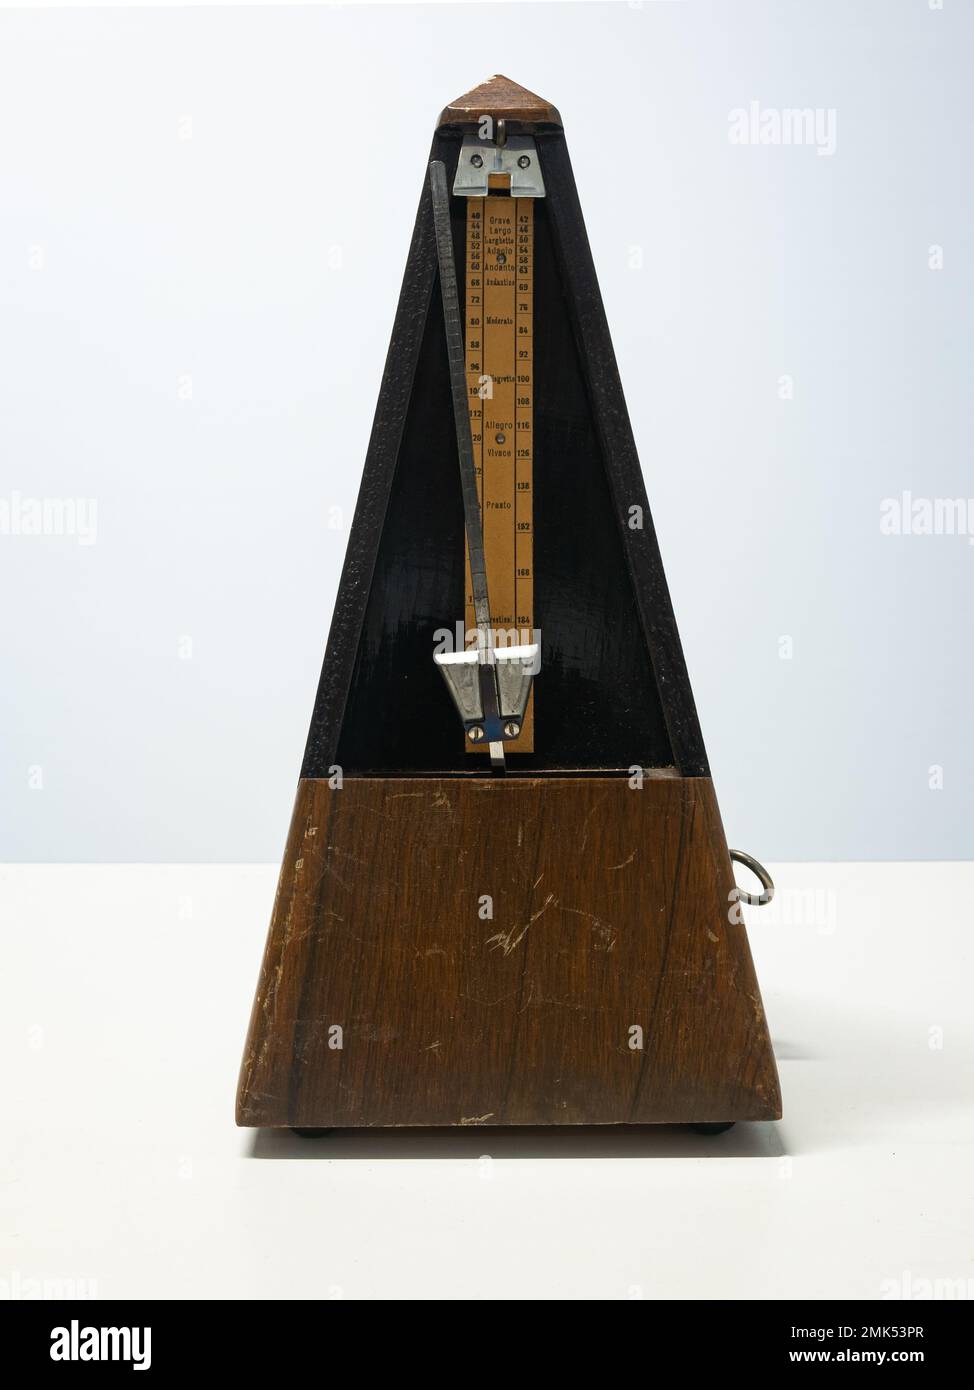 A metronome is a device that produces an audible click or other sound at a  regular interval that can be set by the user, typically in beats per minute  Stock Photo 